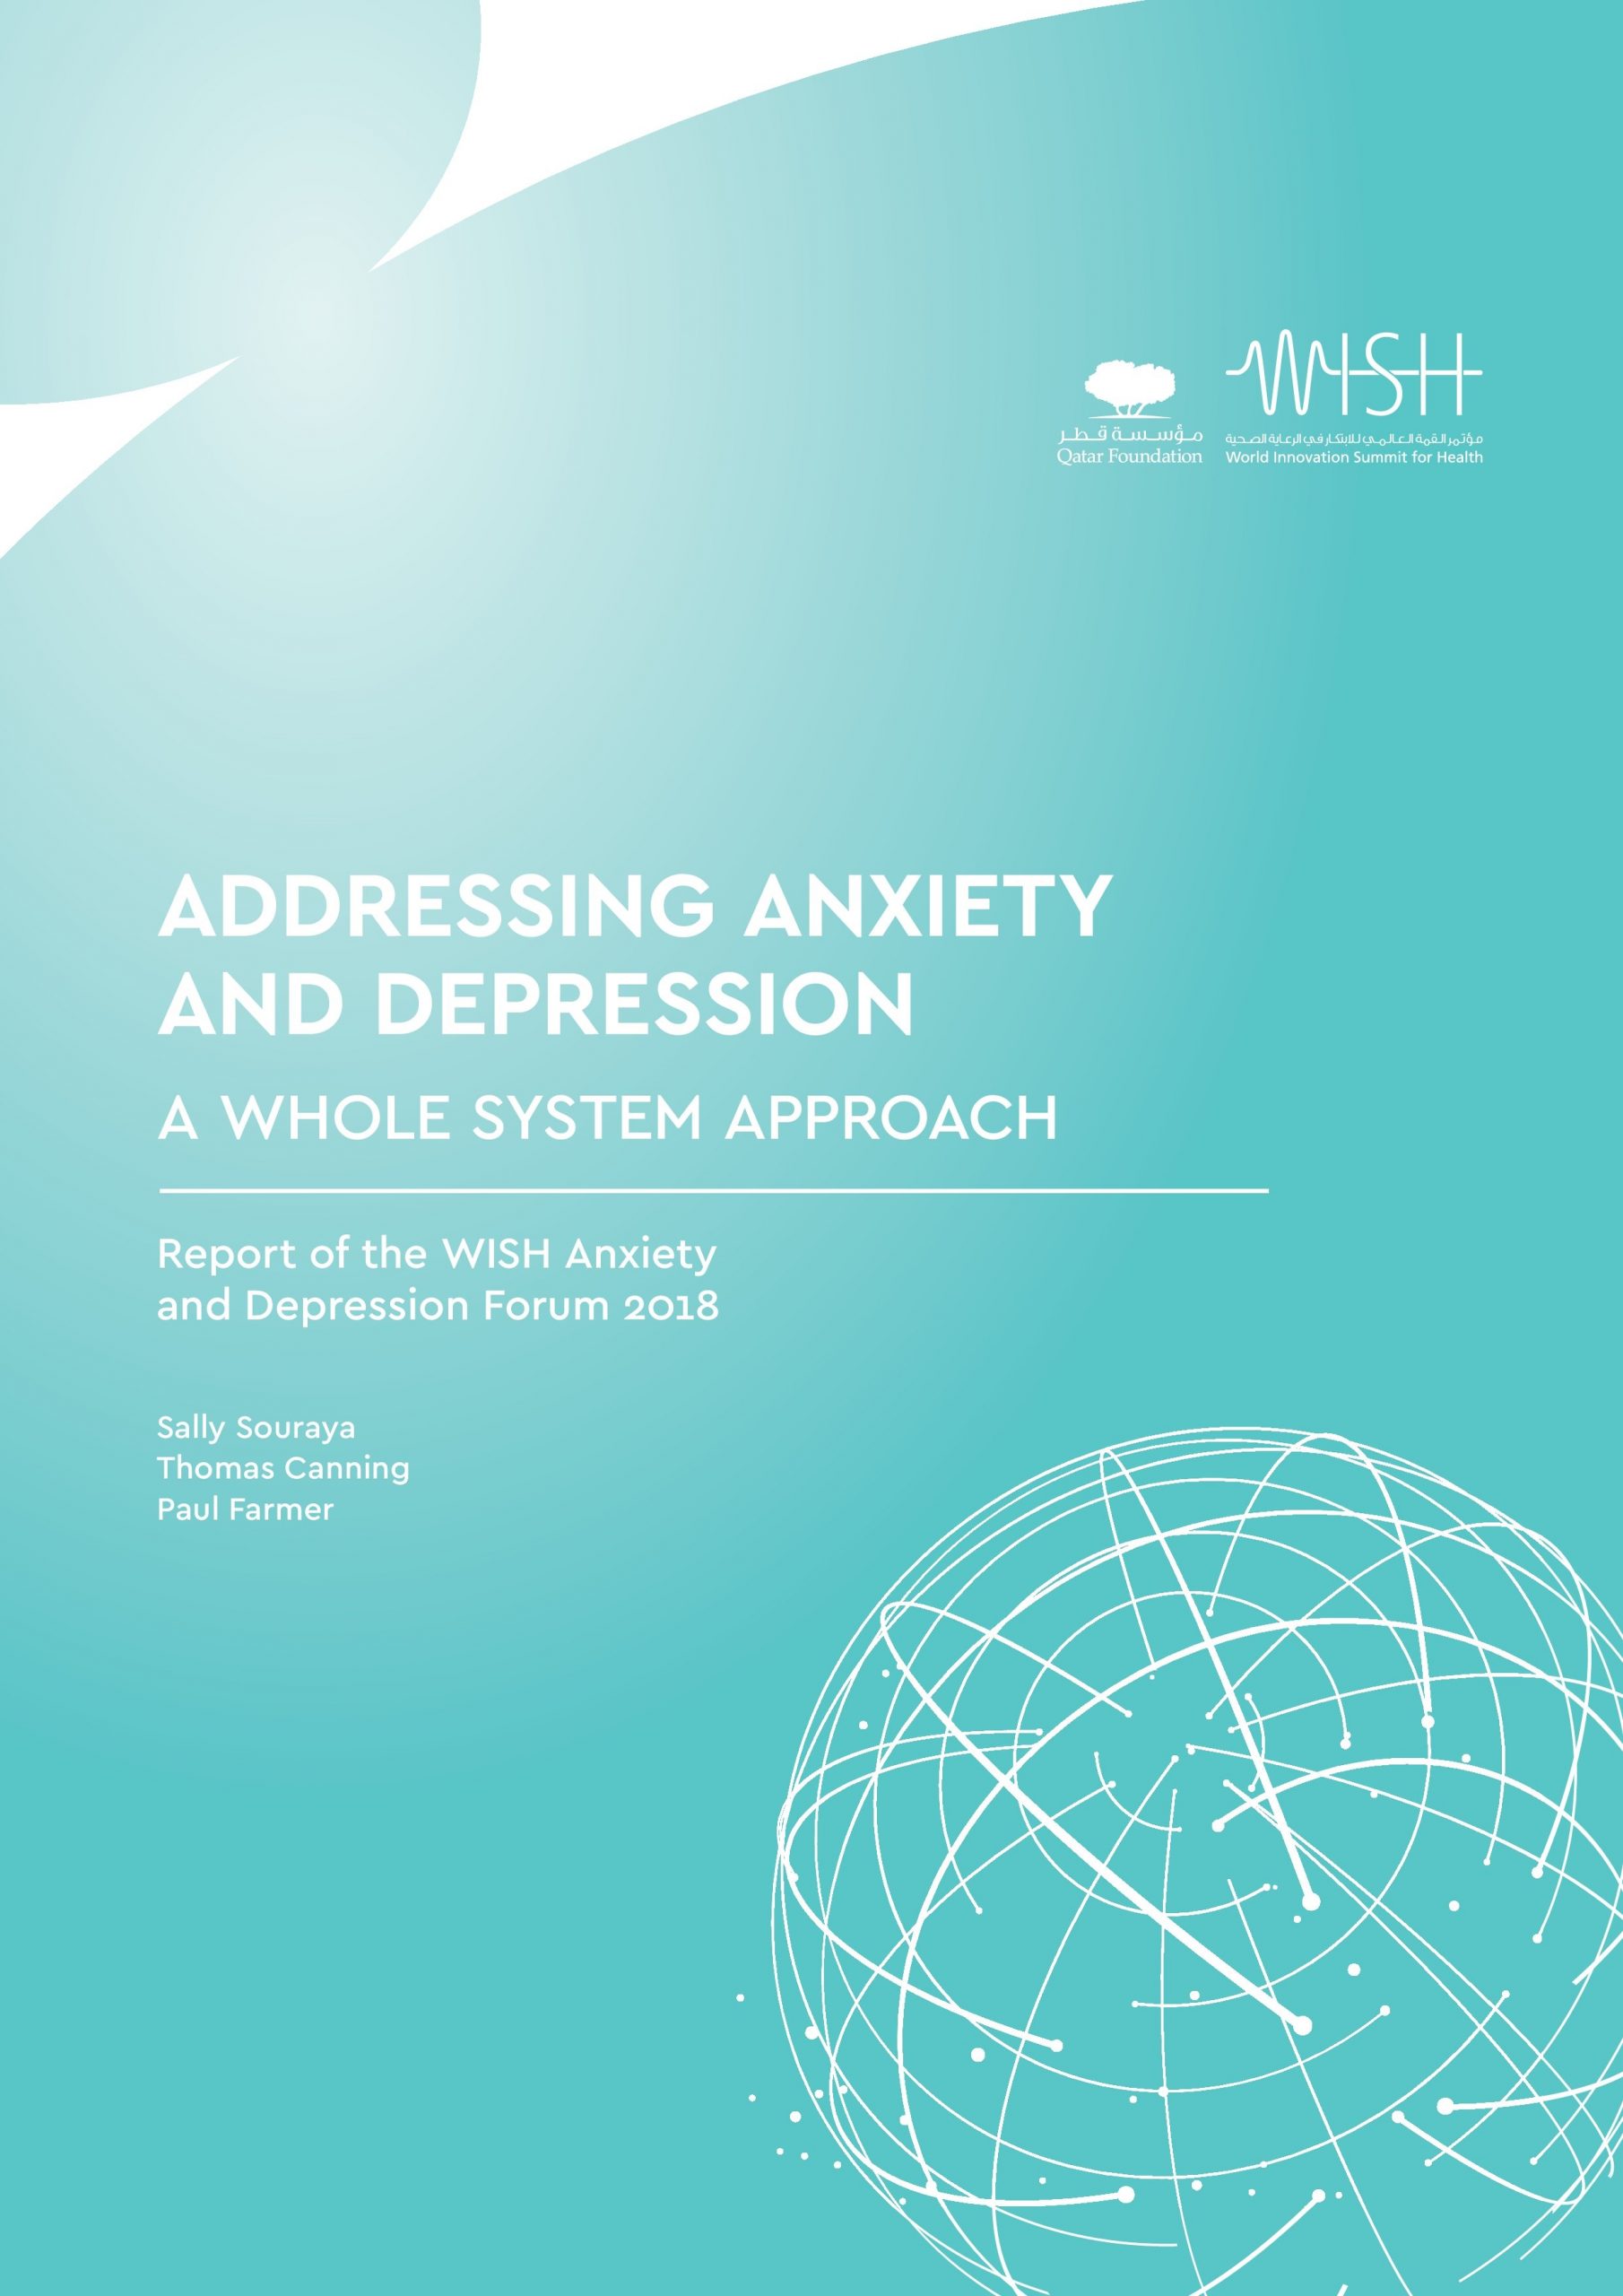 Addressing Anxiety and Depression: A Whole System Approach